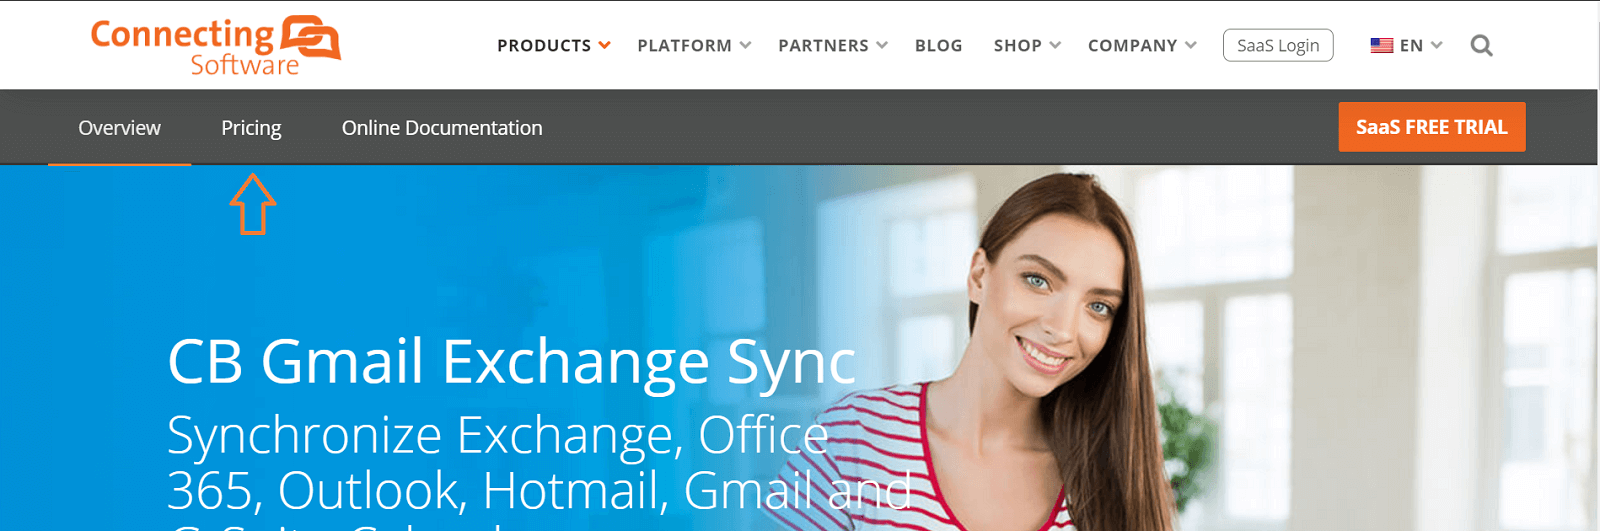 CB Gmail Exchange Sync product page